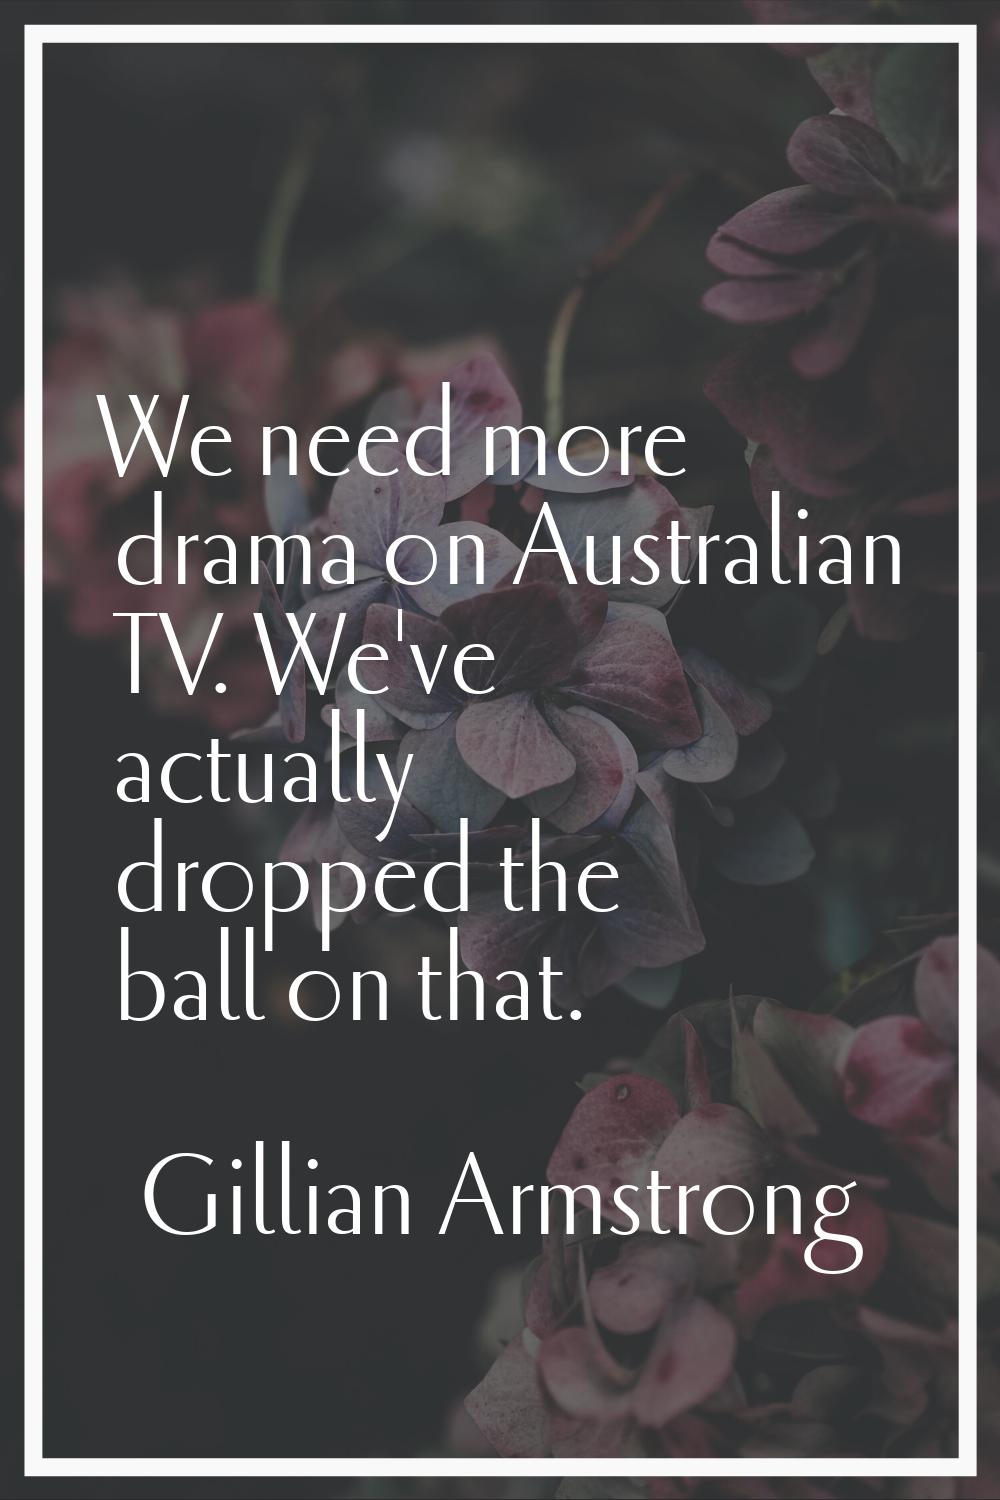 We need more drama on Australian TV. We've actually dropped the ball on that.